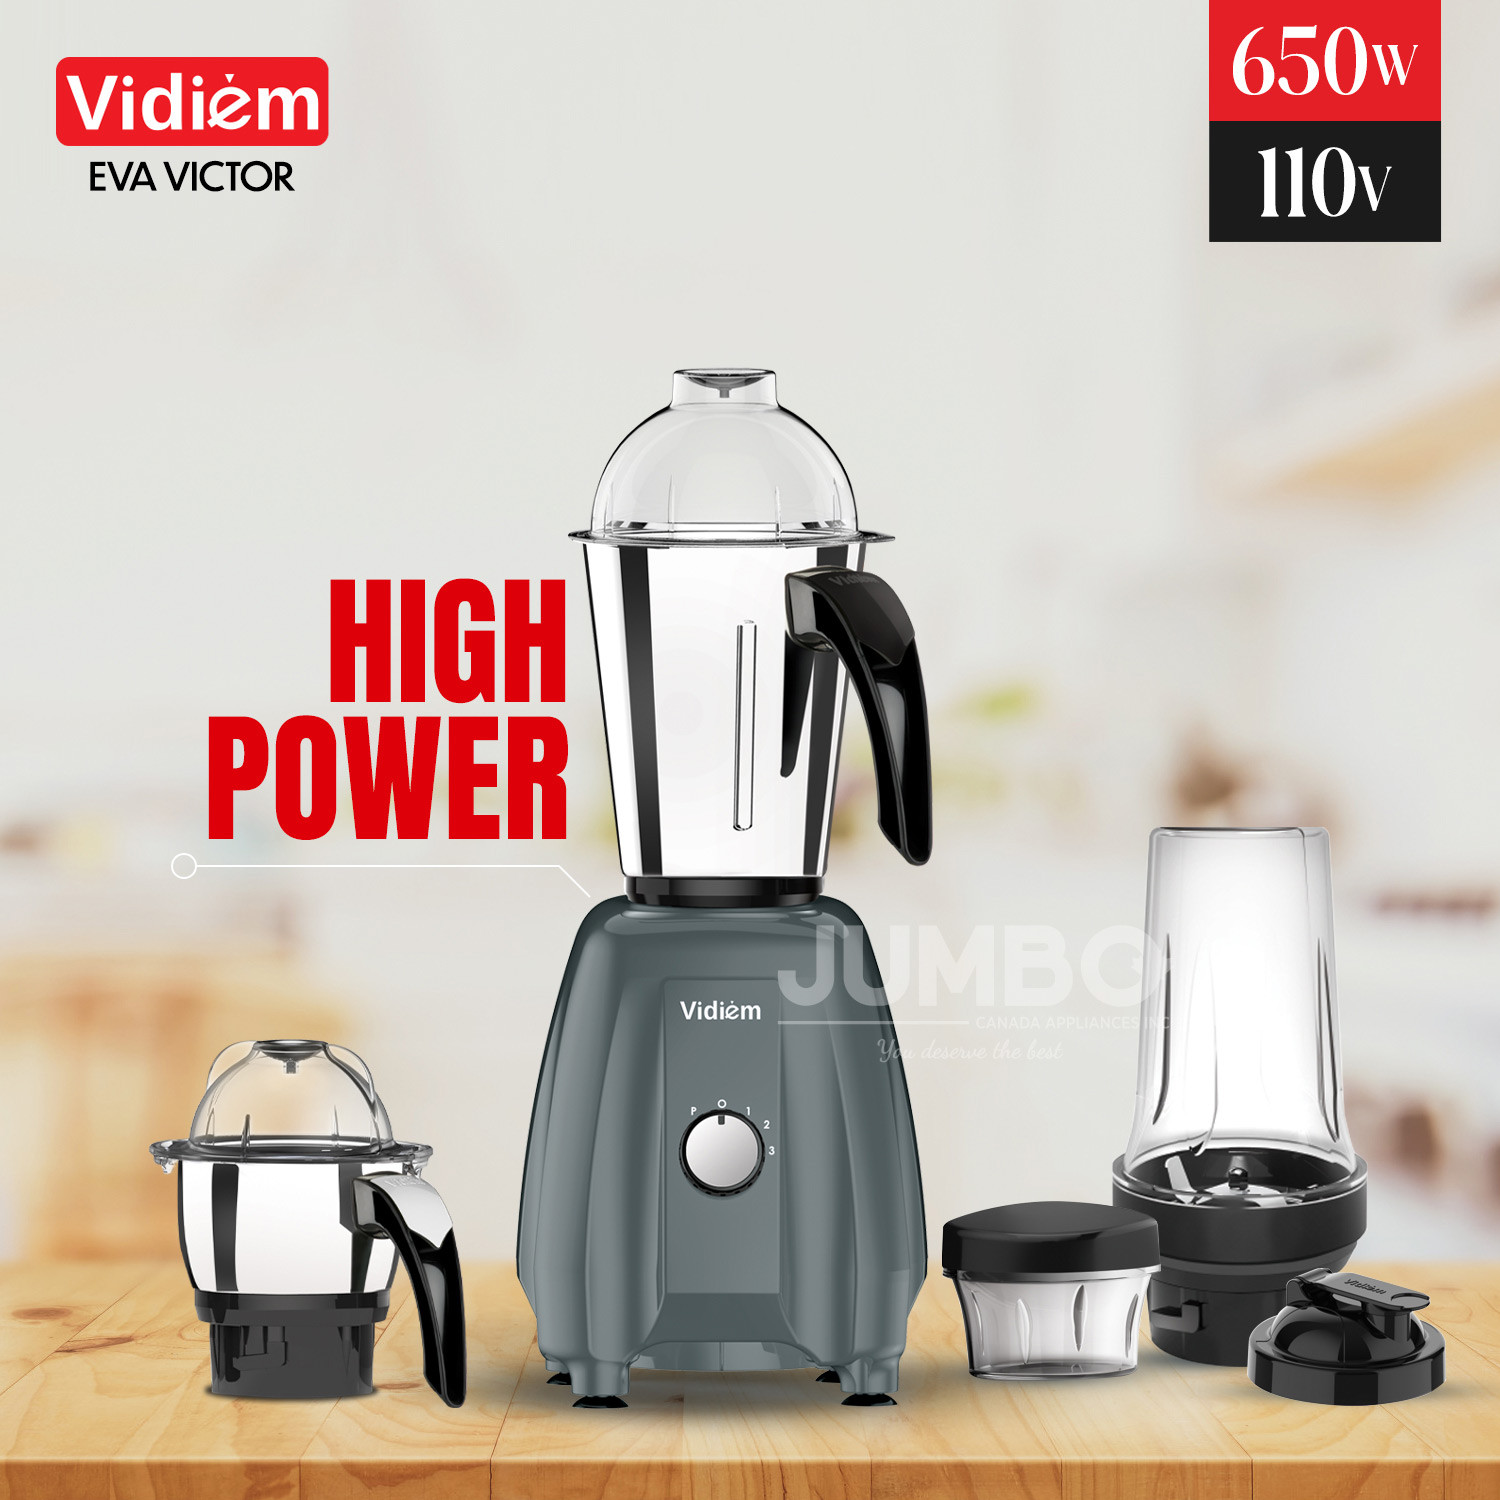 vidiem-eva-victor-pro-650w-110v-indian-mixer-grinder-ss-jars-250ml-spice-personal-coffee-herbs-grinder-with-500ml-personal-juices-shakes-smoothie-blender-made-for-canada-usa6